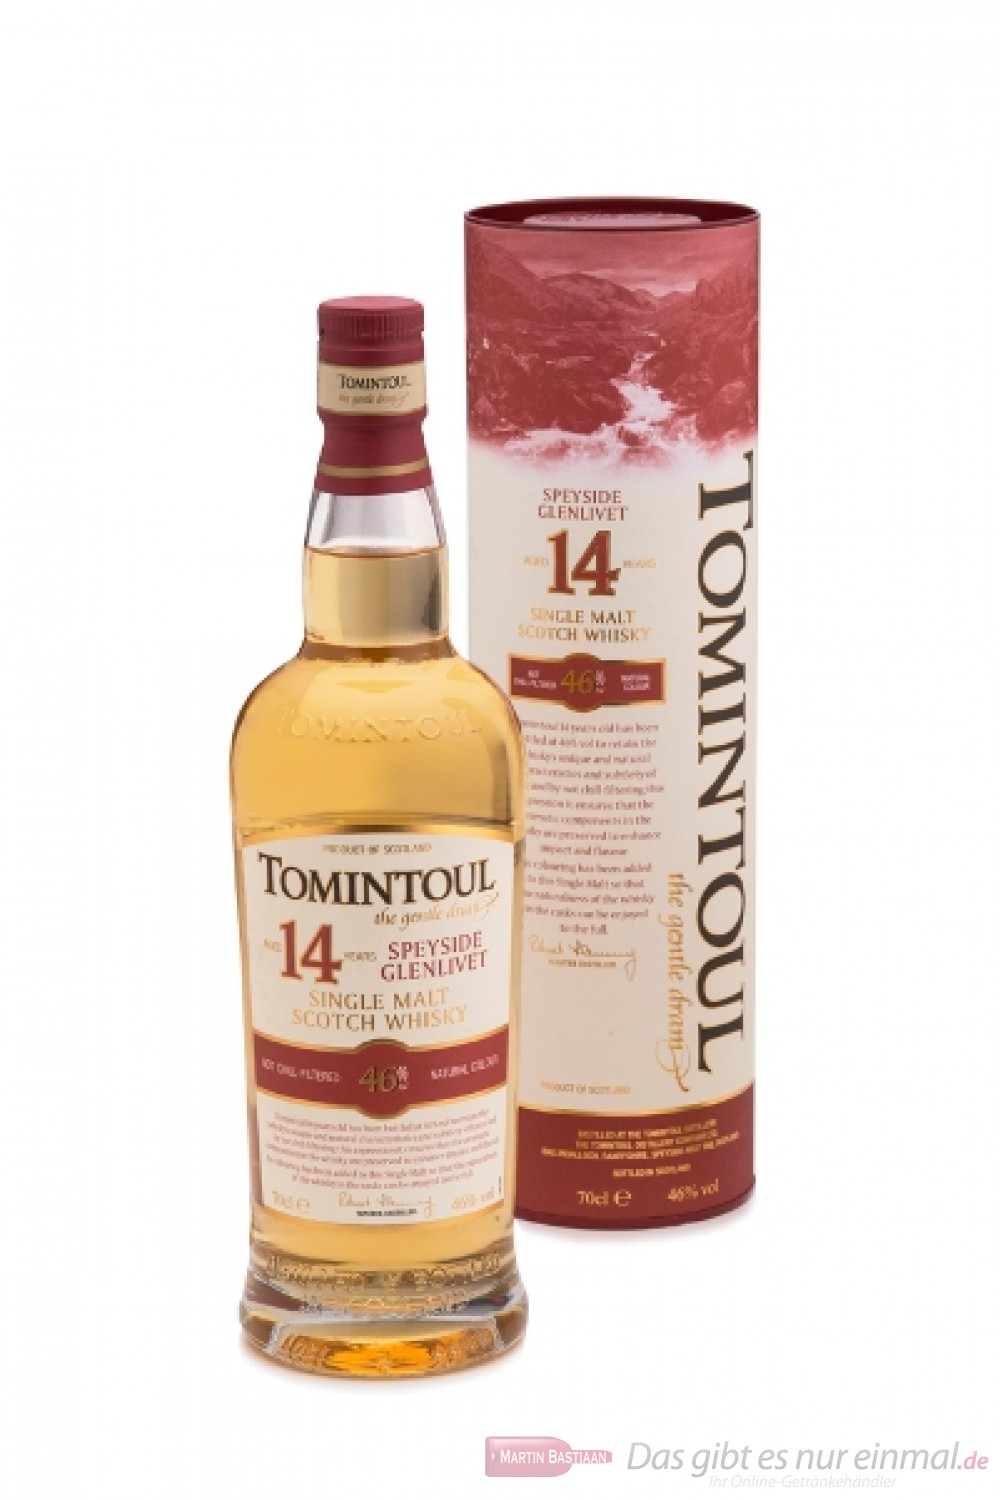 Tomintoul 14 Years